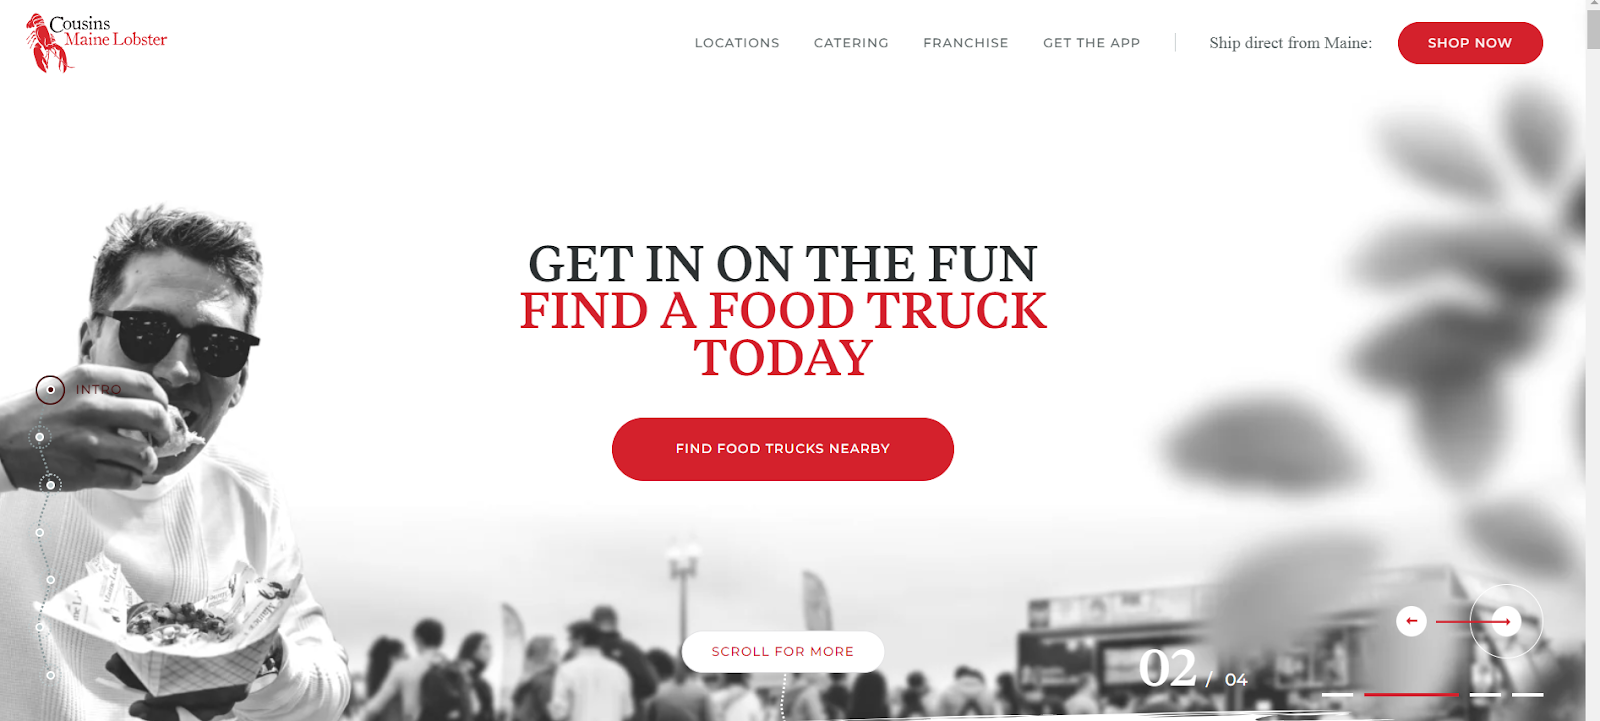 Food truck website design example from Cousins Maine Lobster.